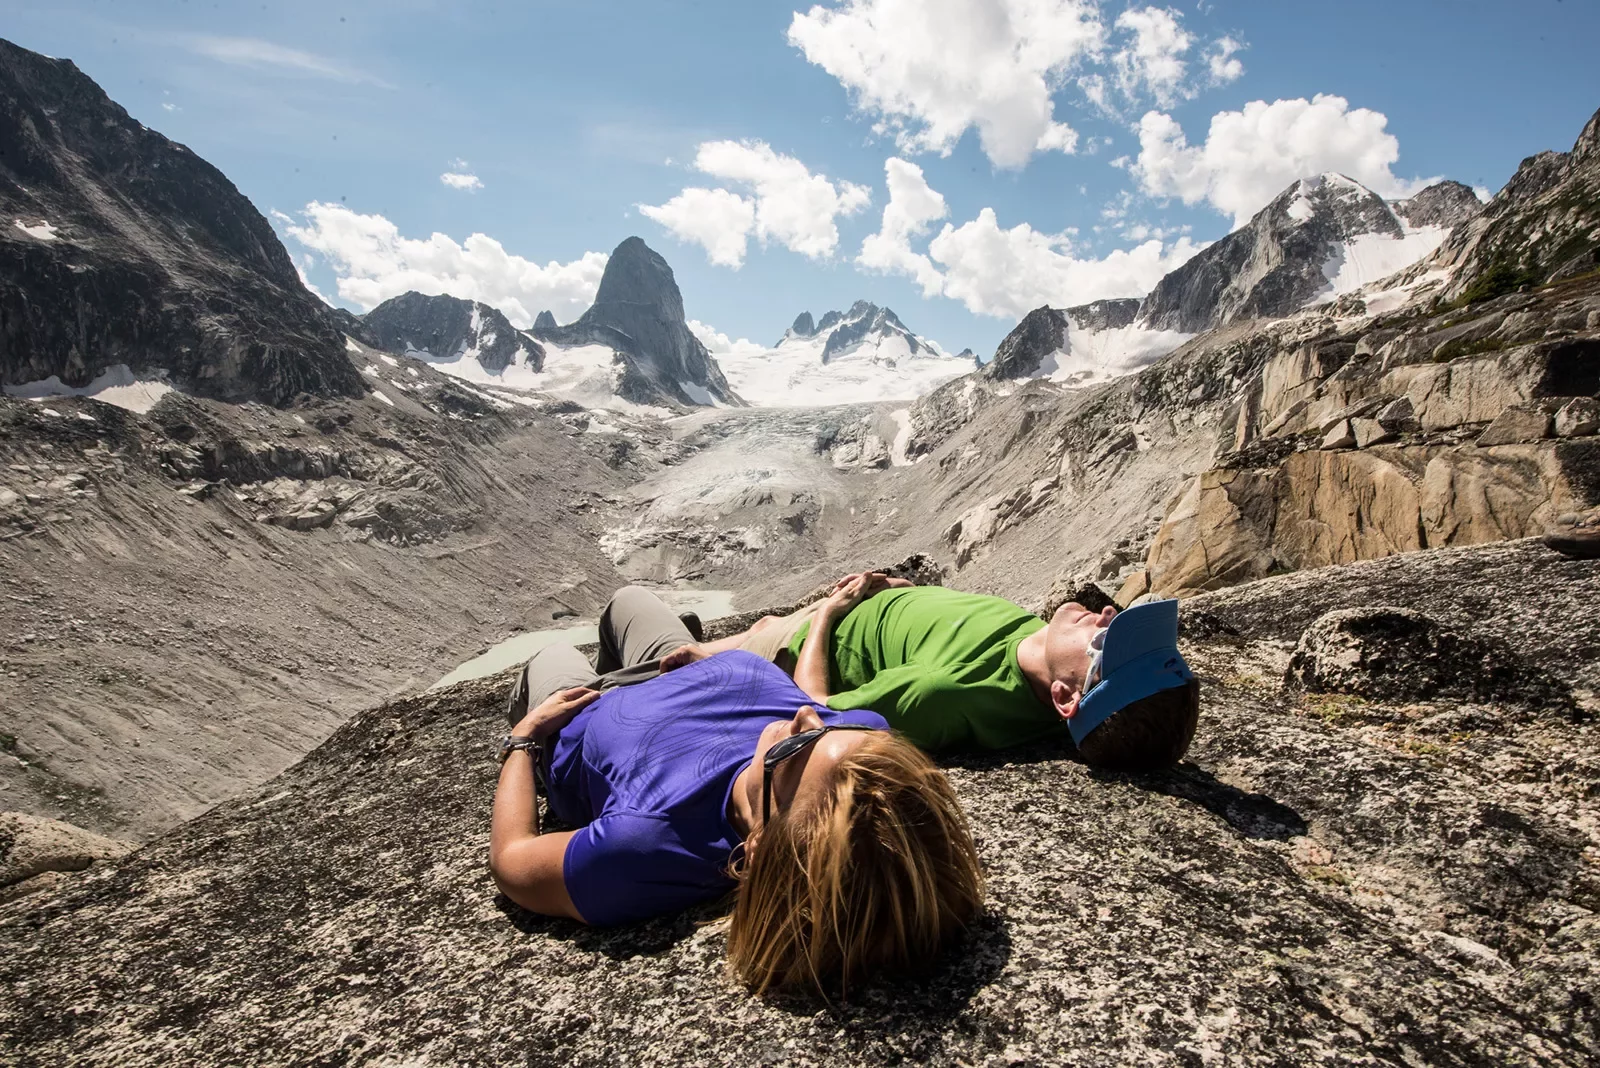 Two guests laying on rocky mountainside, arid cliffs and clouds in background.